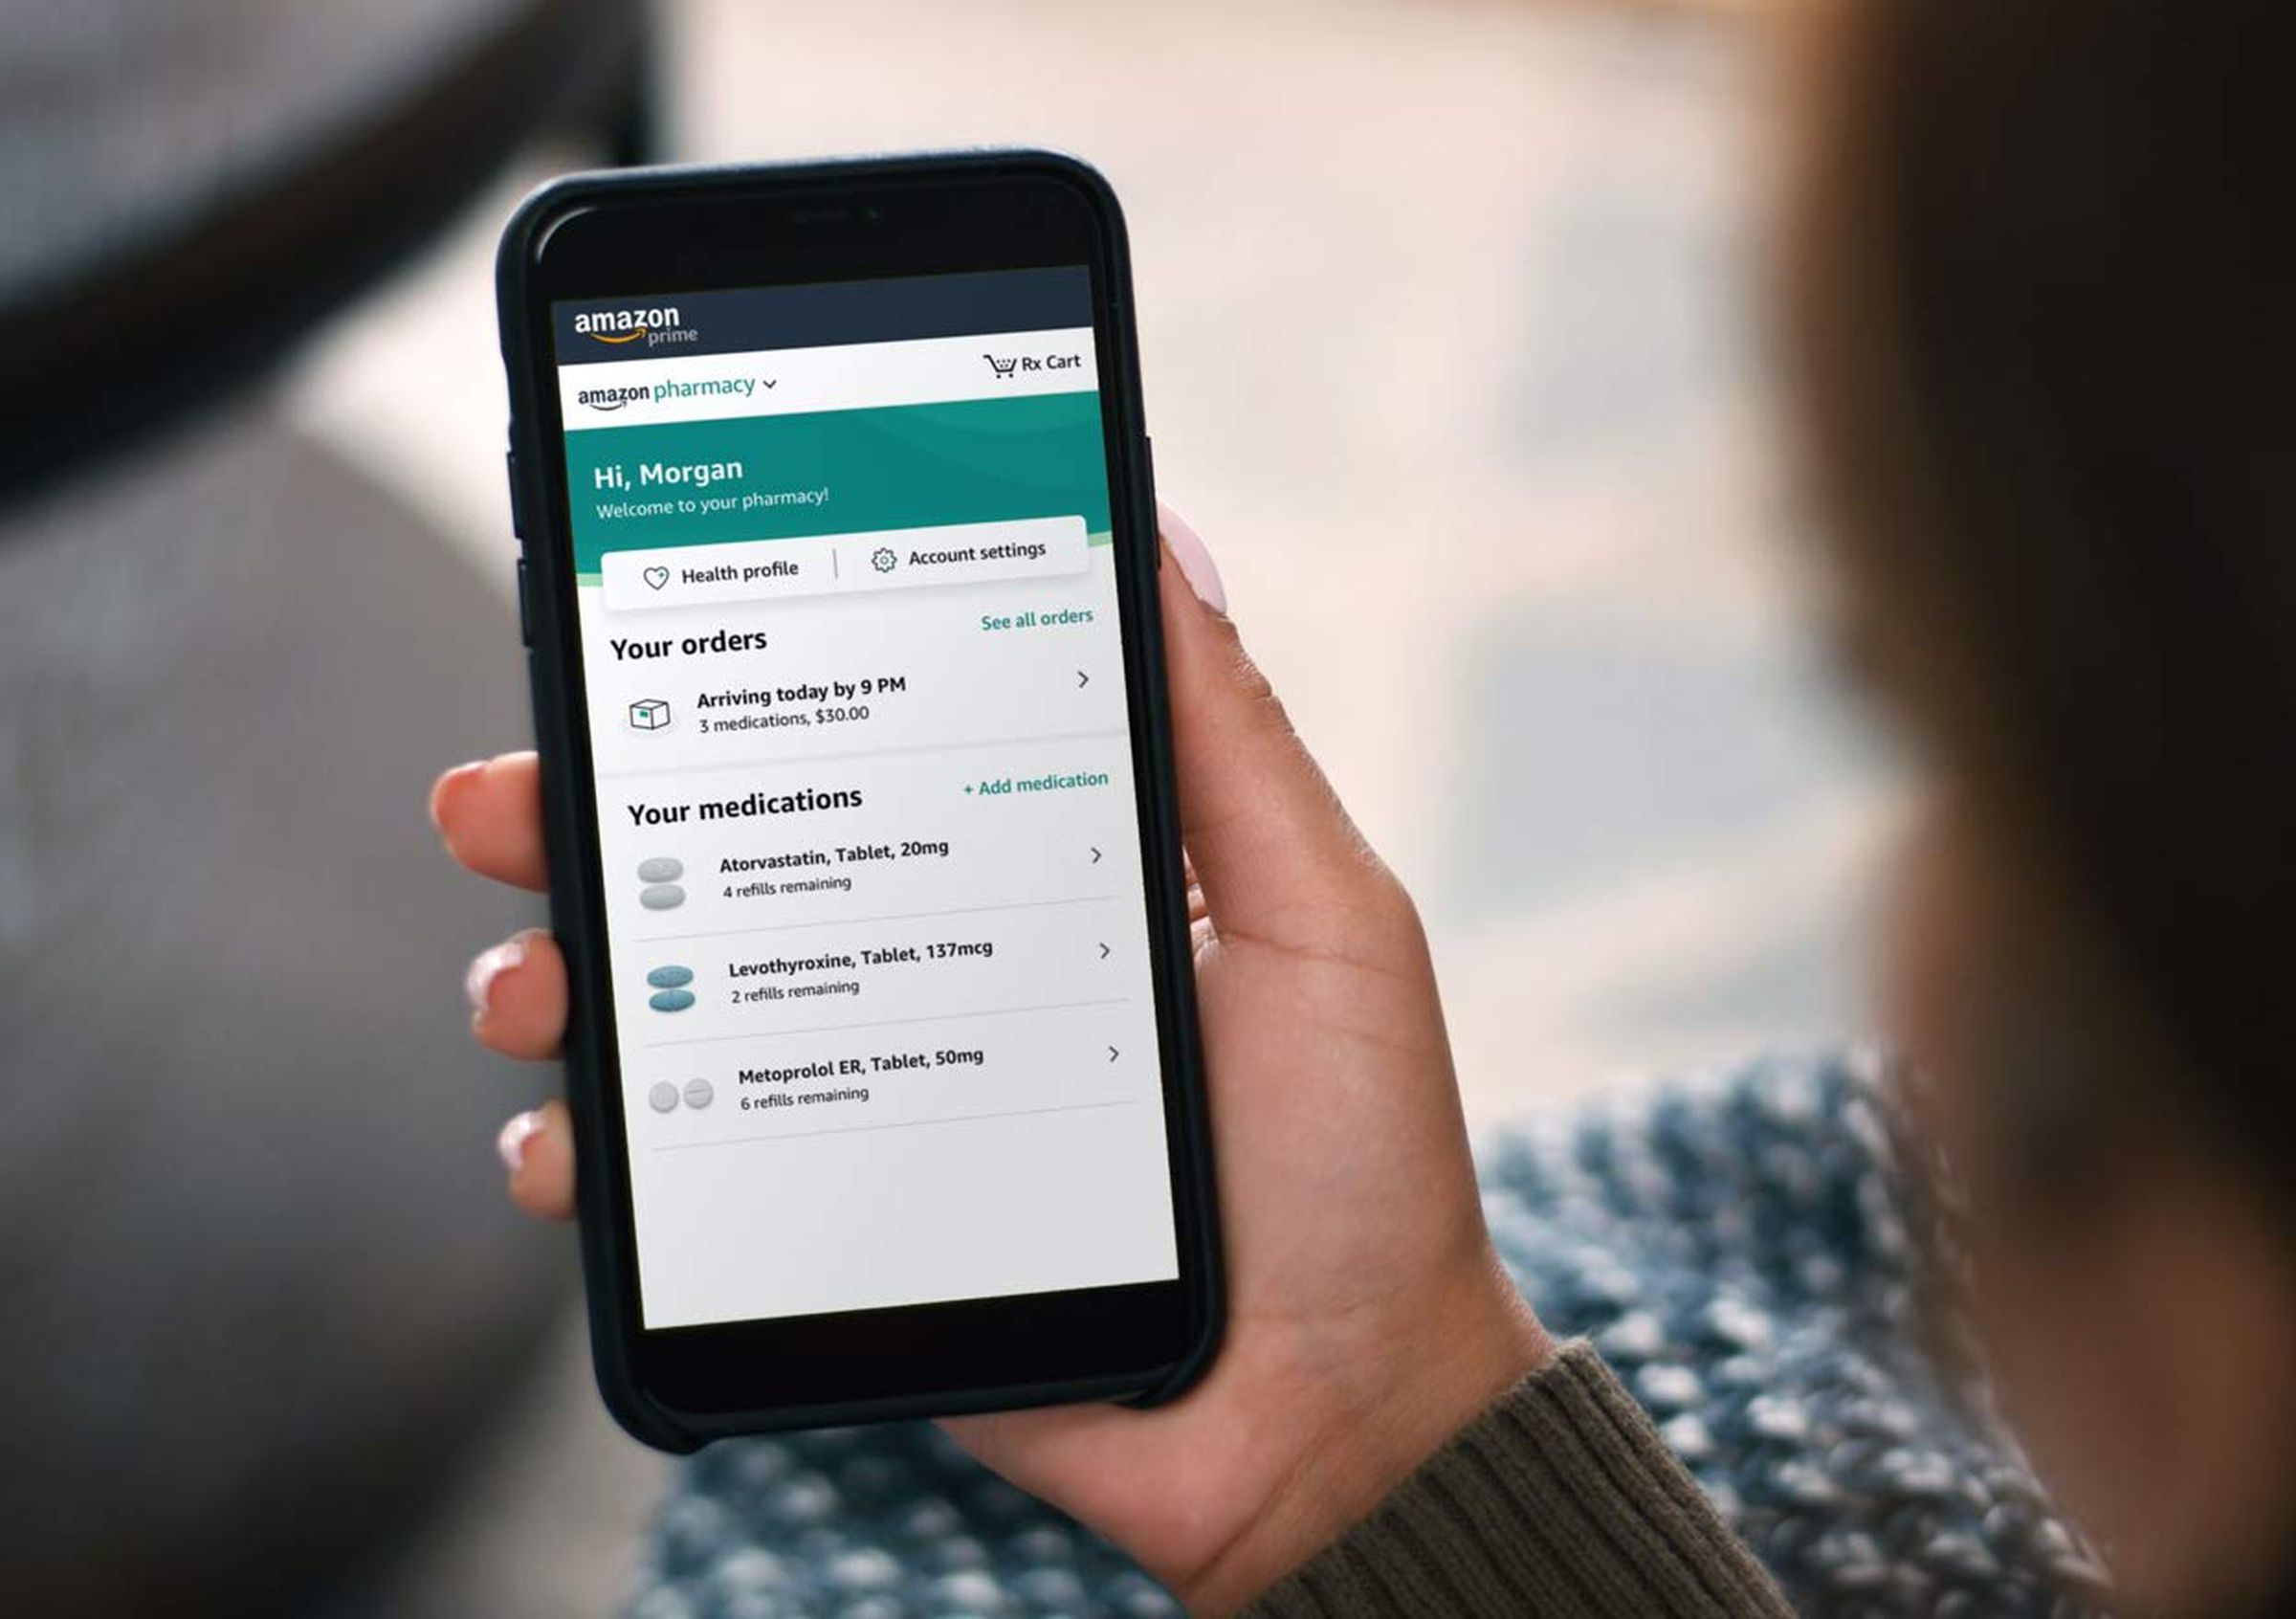 Customers will be able to manage their prescriptions and orders through Amazon’s website and mobile apps. 